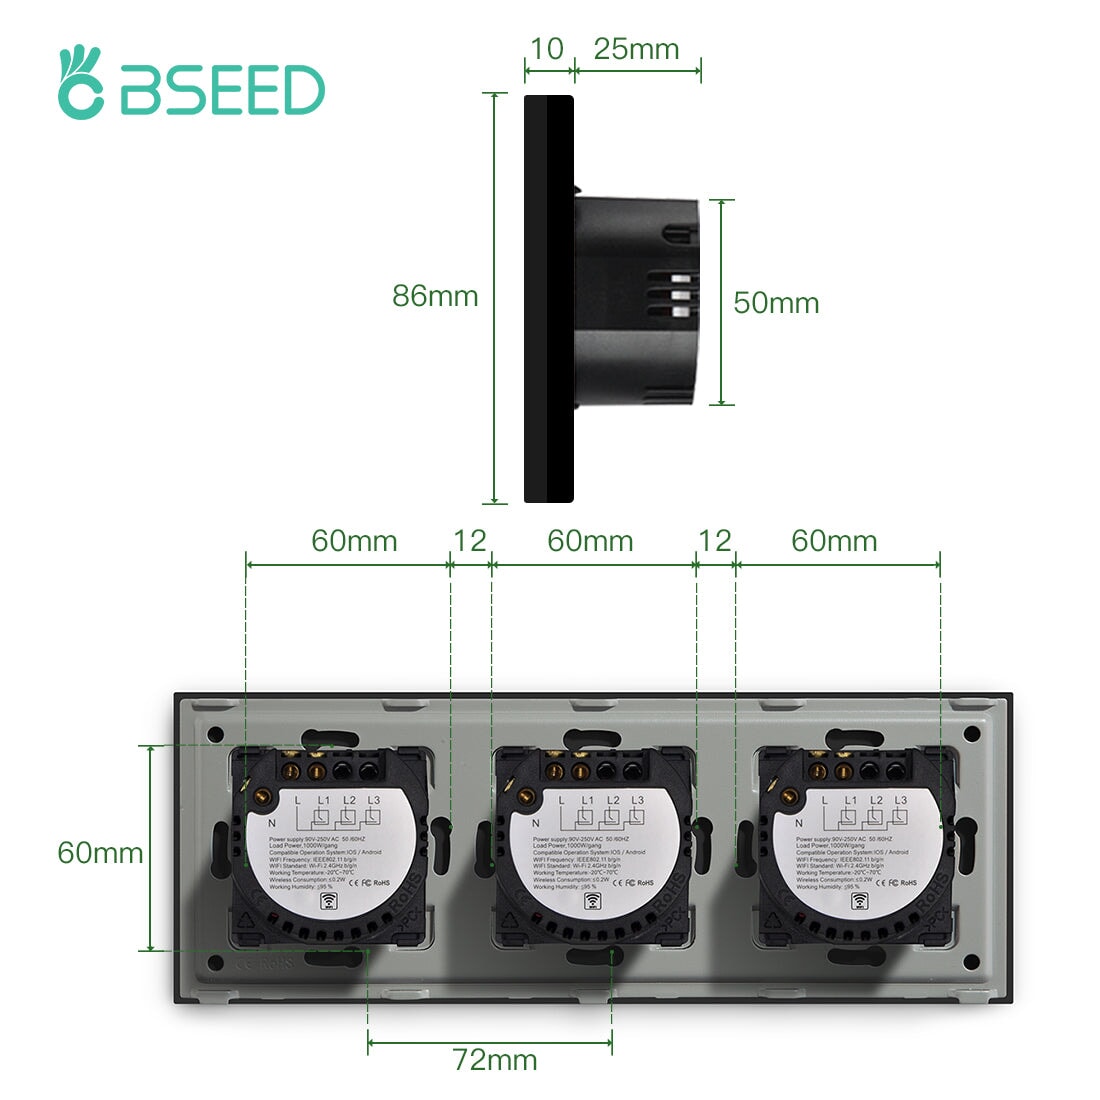 Bseed WiFi Light Switch Triple Switch 1/2/3 Way 228mm Alexa Google Smart Life Control Light Switches Bseedswitch 